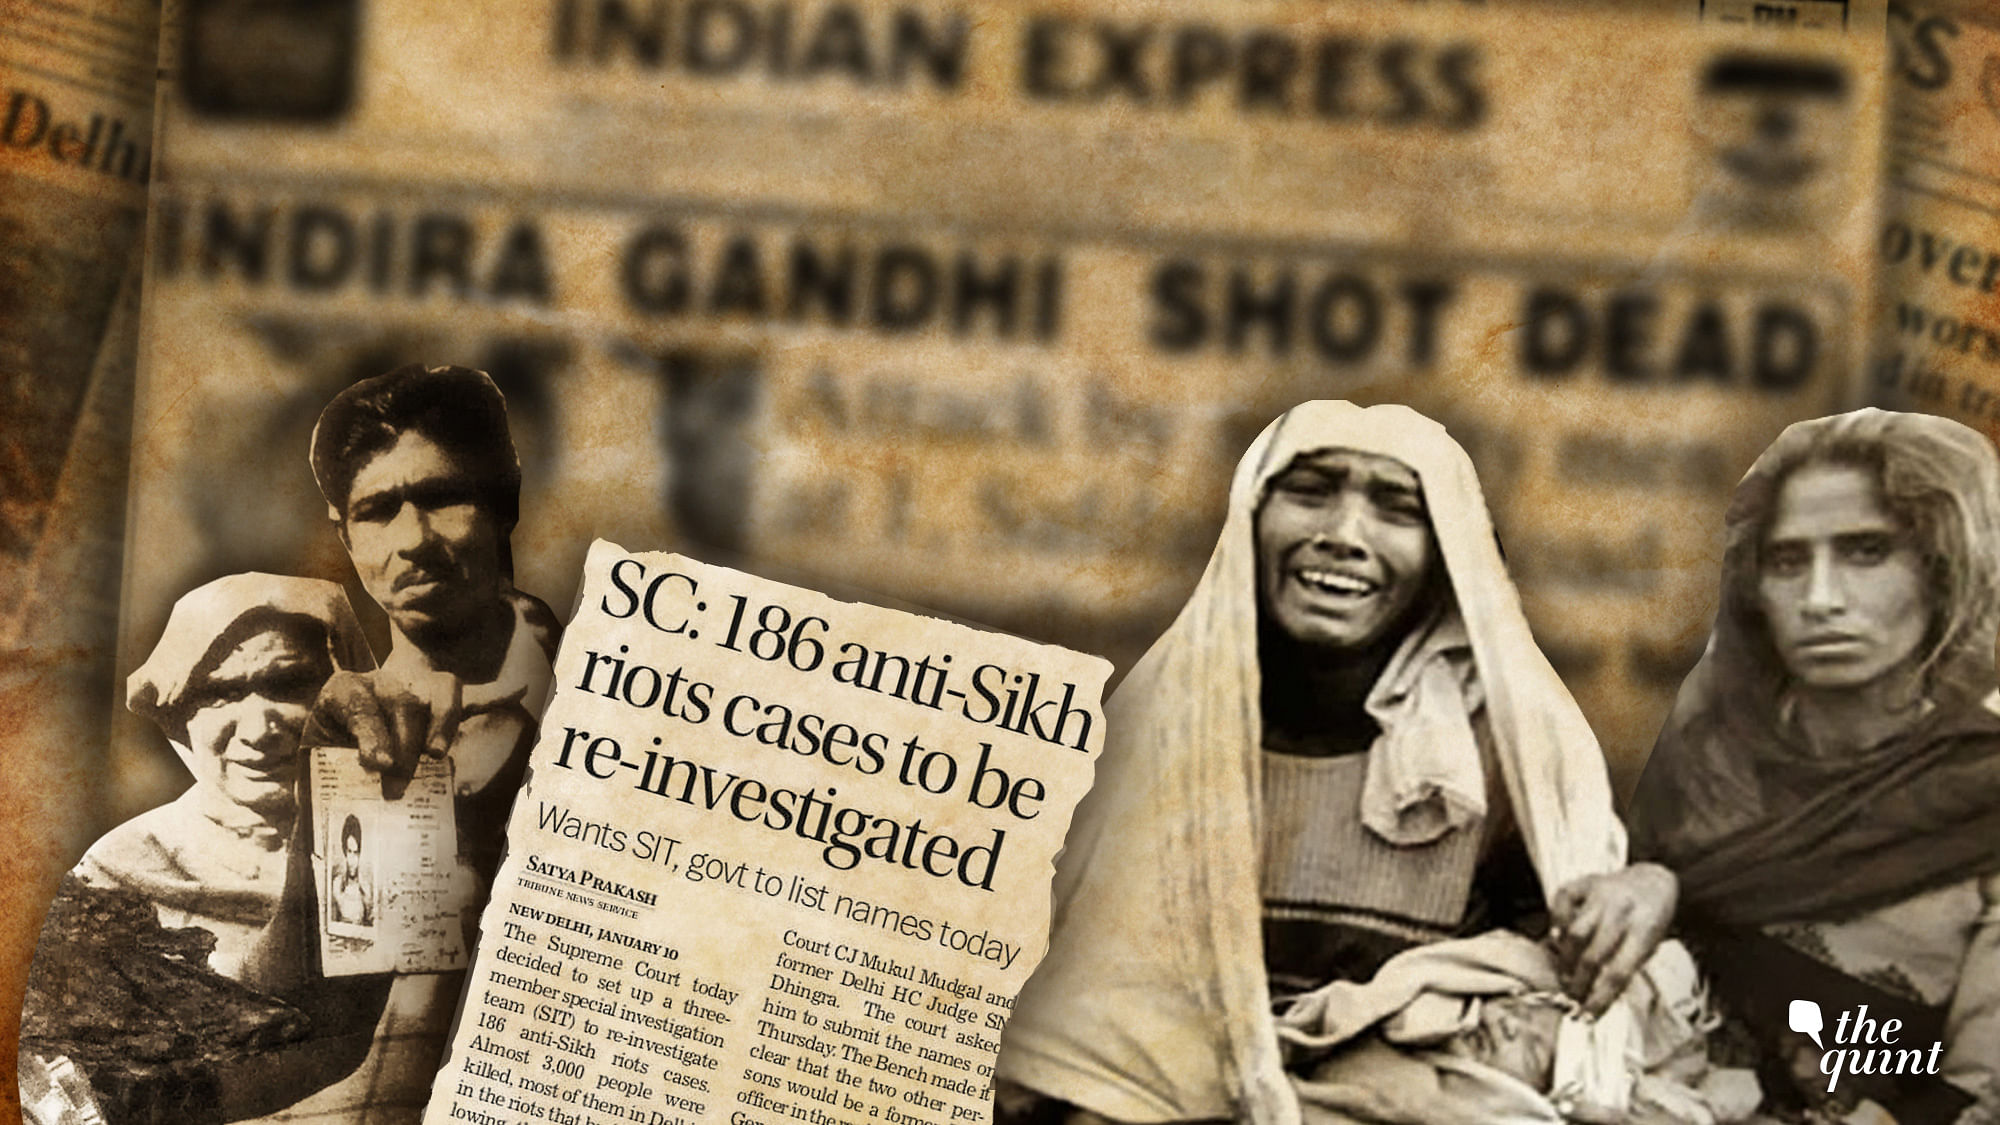 Indira Gandhi was assassinated on 31 October which led to the infamous 1984 anti-Sikh riots a few days after. Image used for representation.